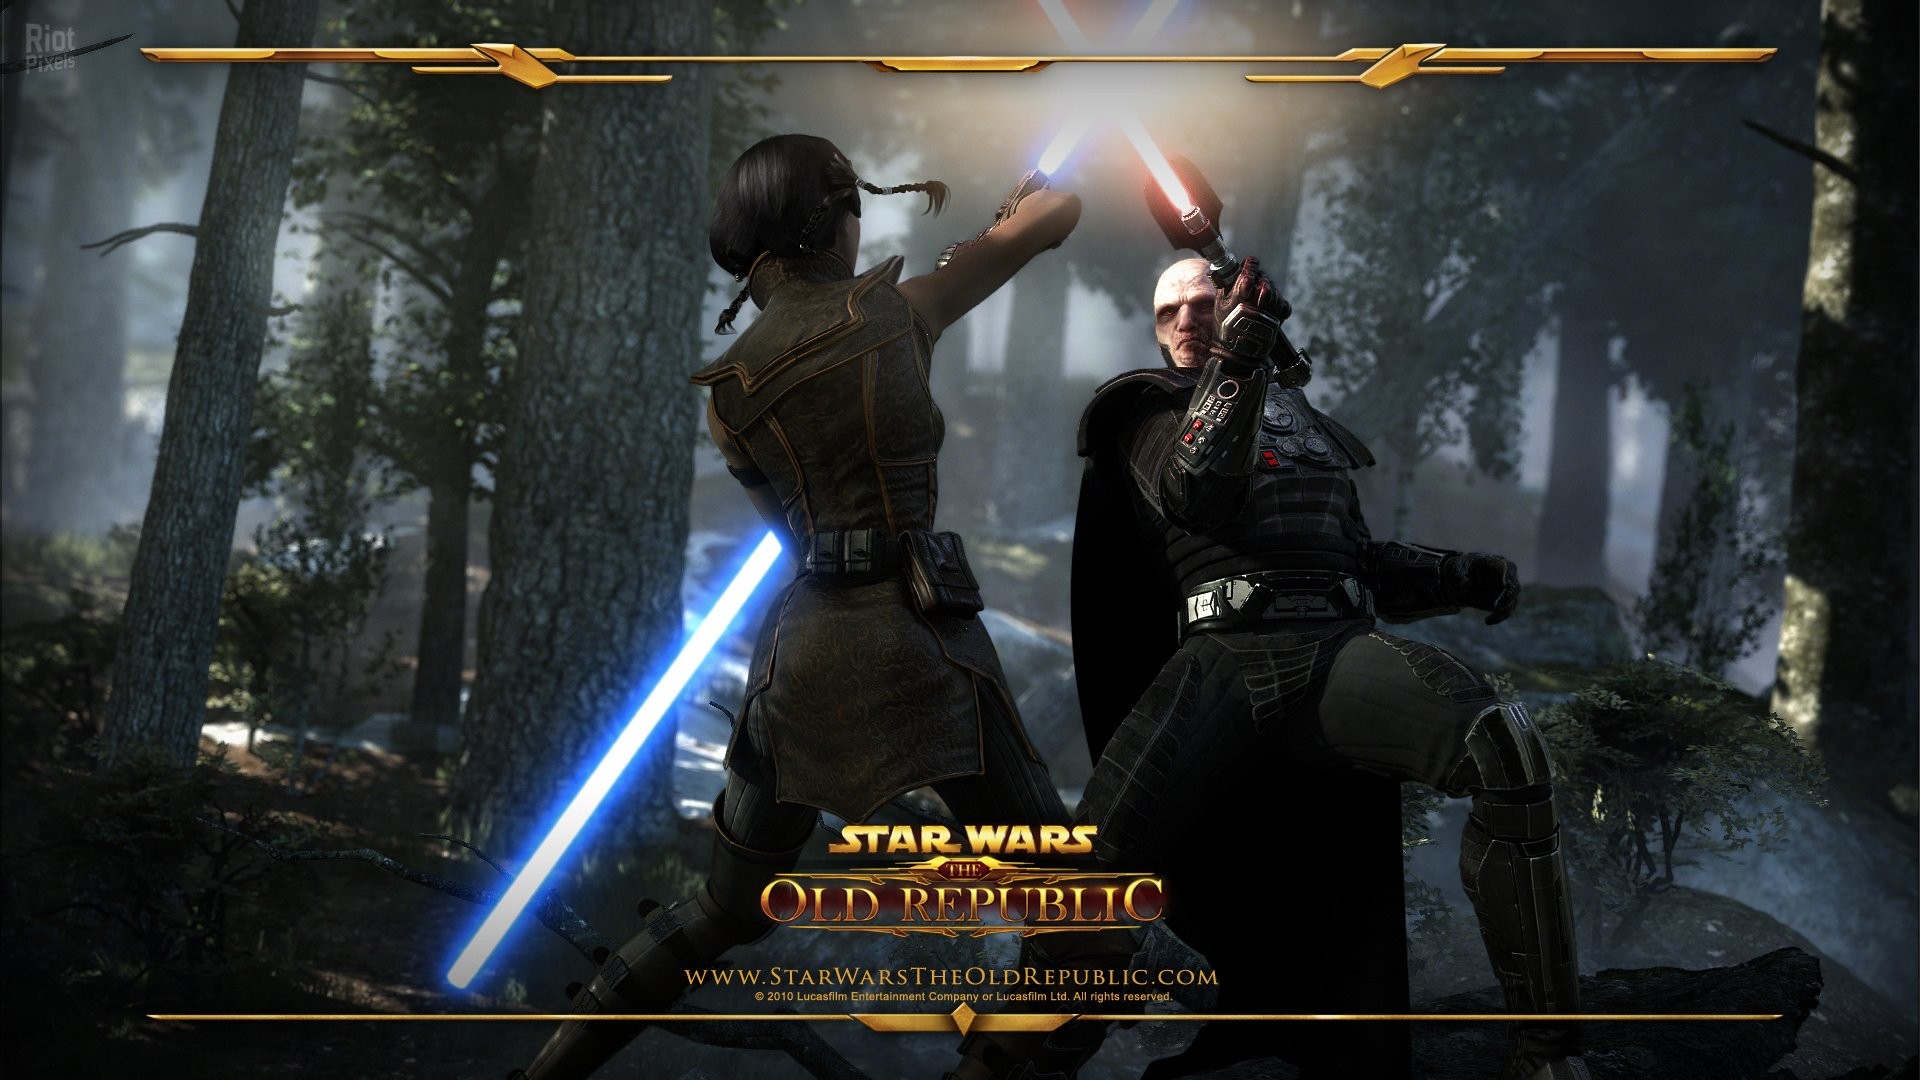 STAR WARS OLD REPUBLIC mmo rpg swtor fighting sci fi wallpaper 518904 WallpaperUP